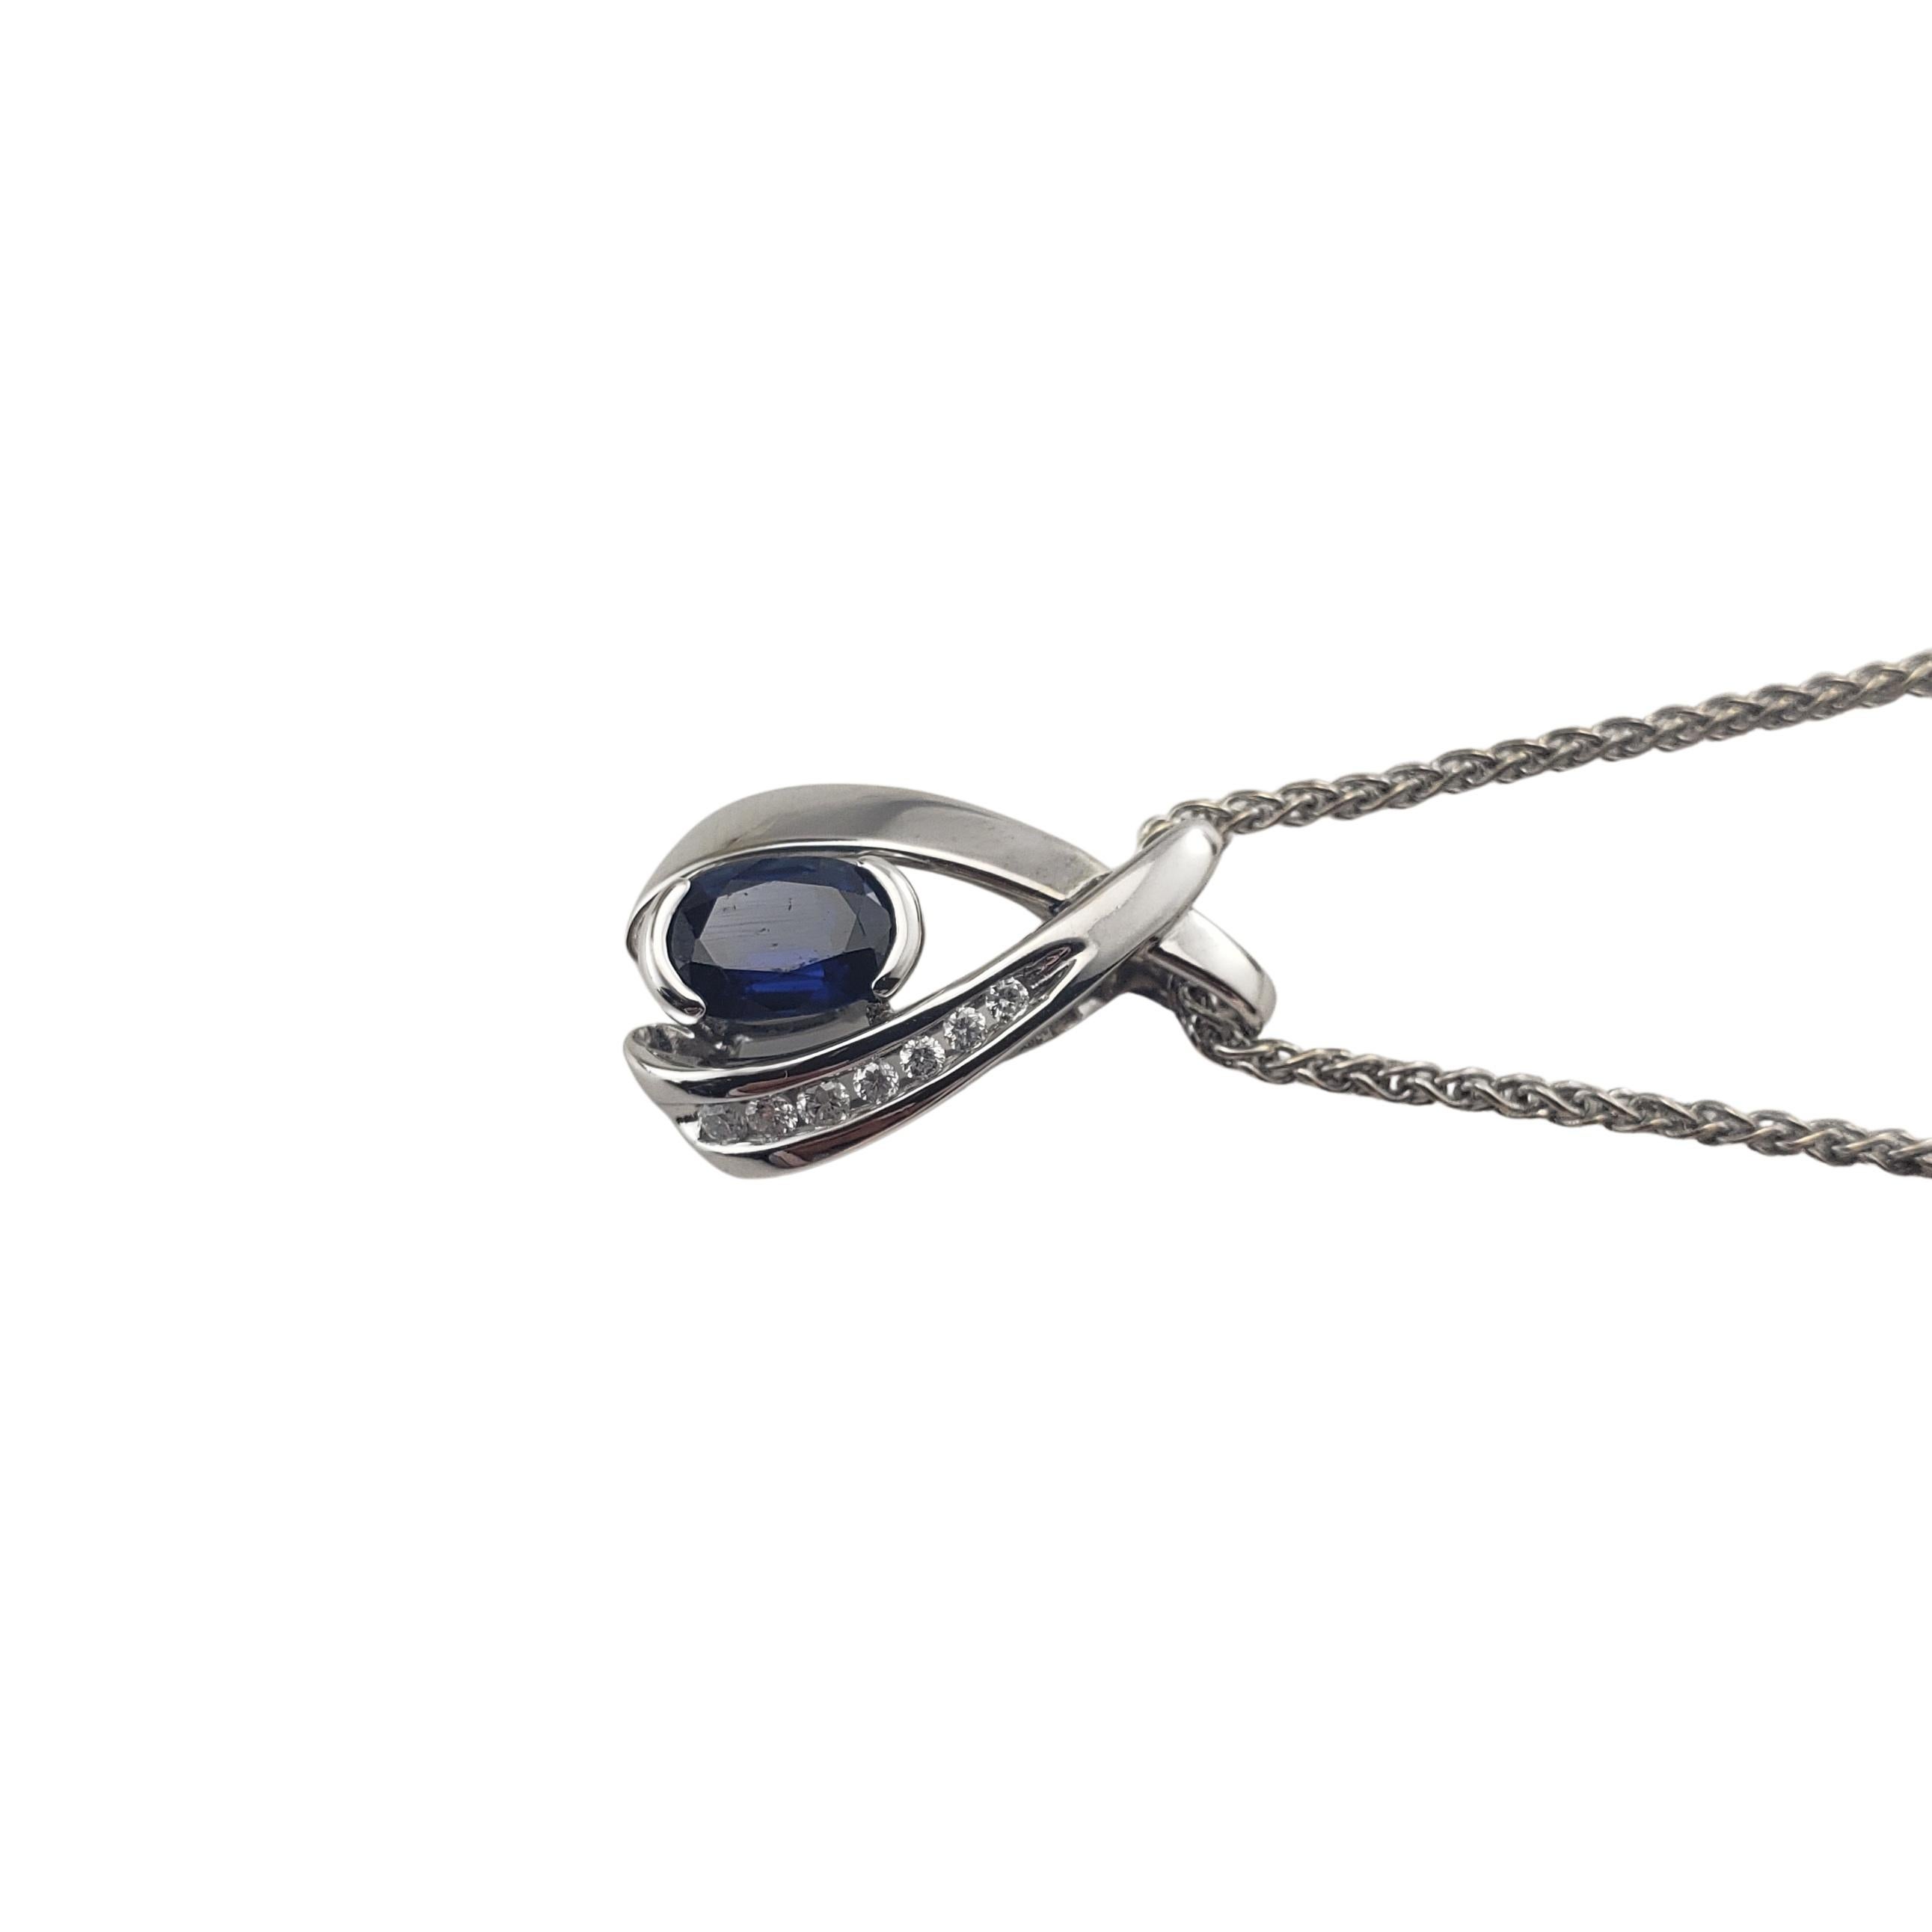 Vintage 14 Karat White Gold Sapphire and Diamond Pendant Necklace-

This stunning pendant features one oval sapphire (6 mm x 5 mm) and seven round brilliant cut diamonds set in 14K white gold. Suspends from a classic white gold